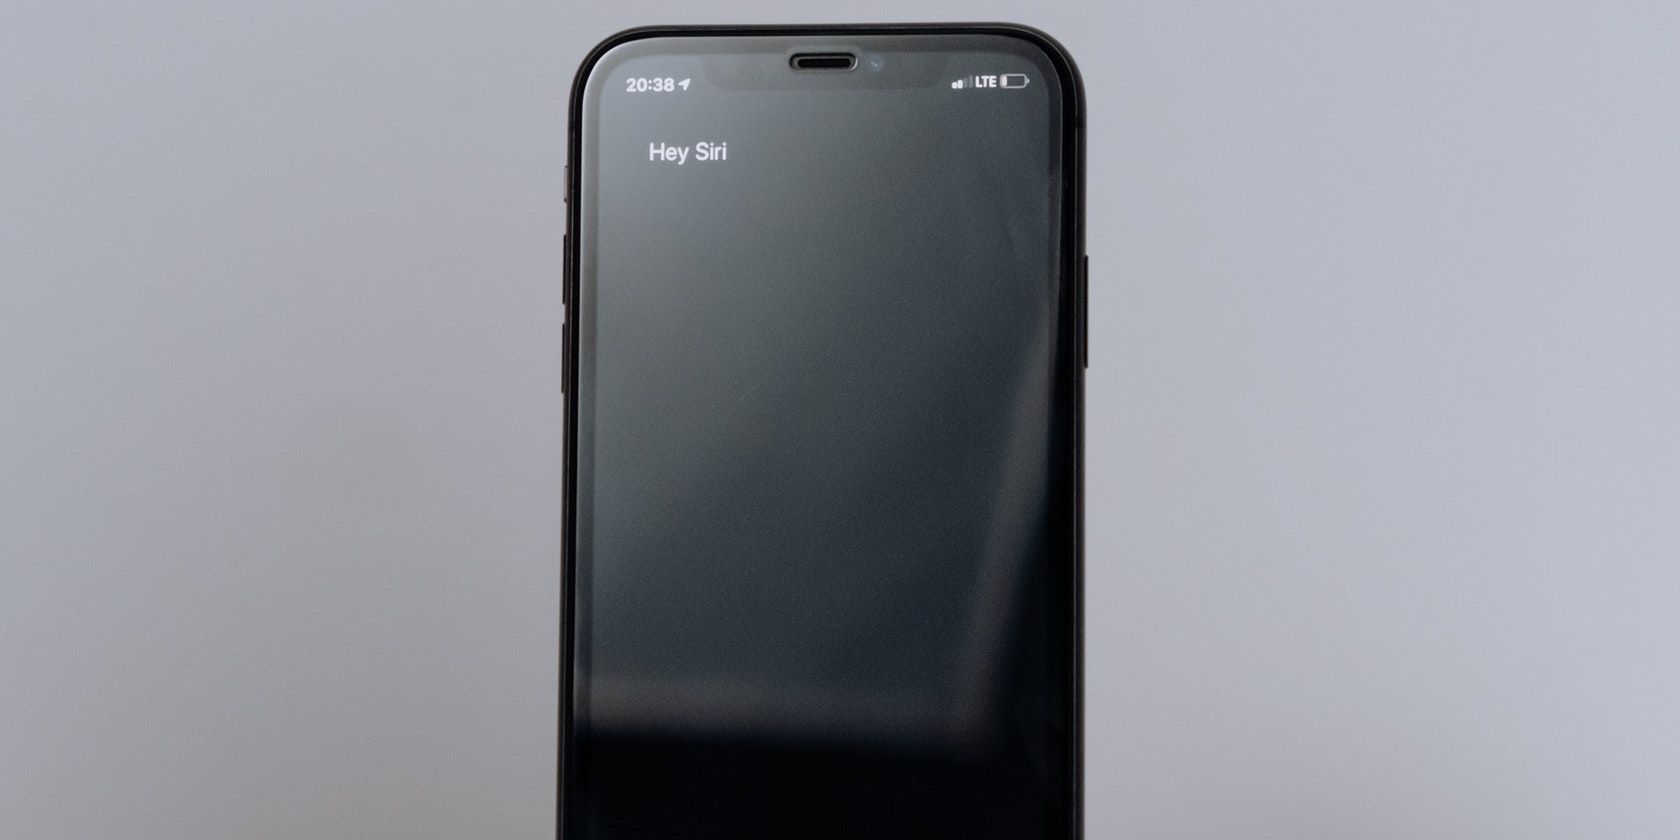 A photo of the iPhone with the Hey Siri prompt.